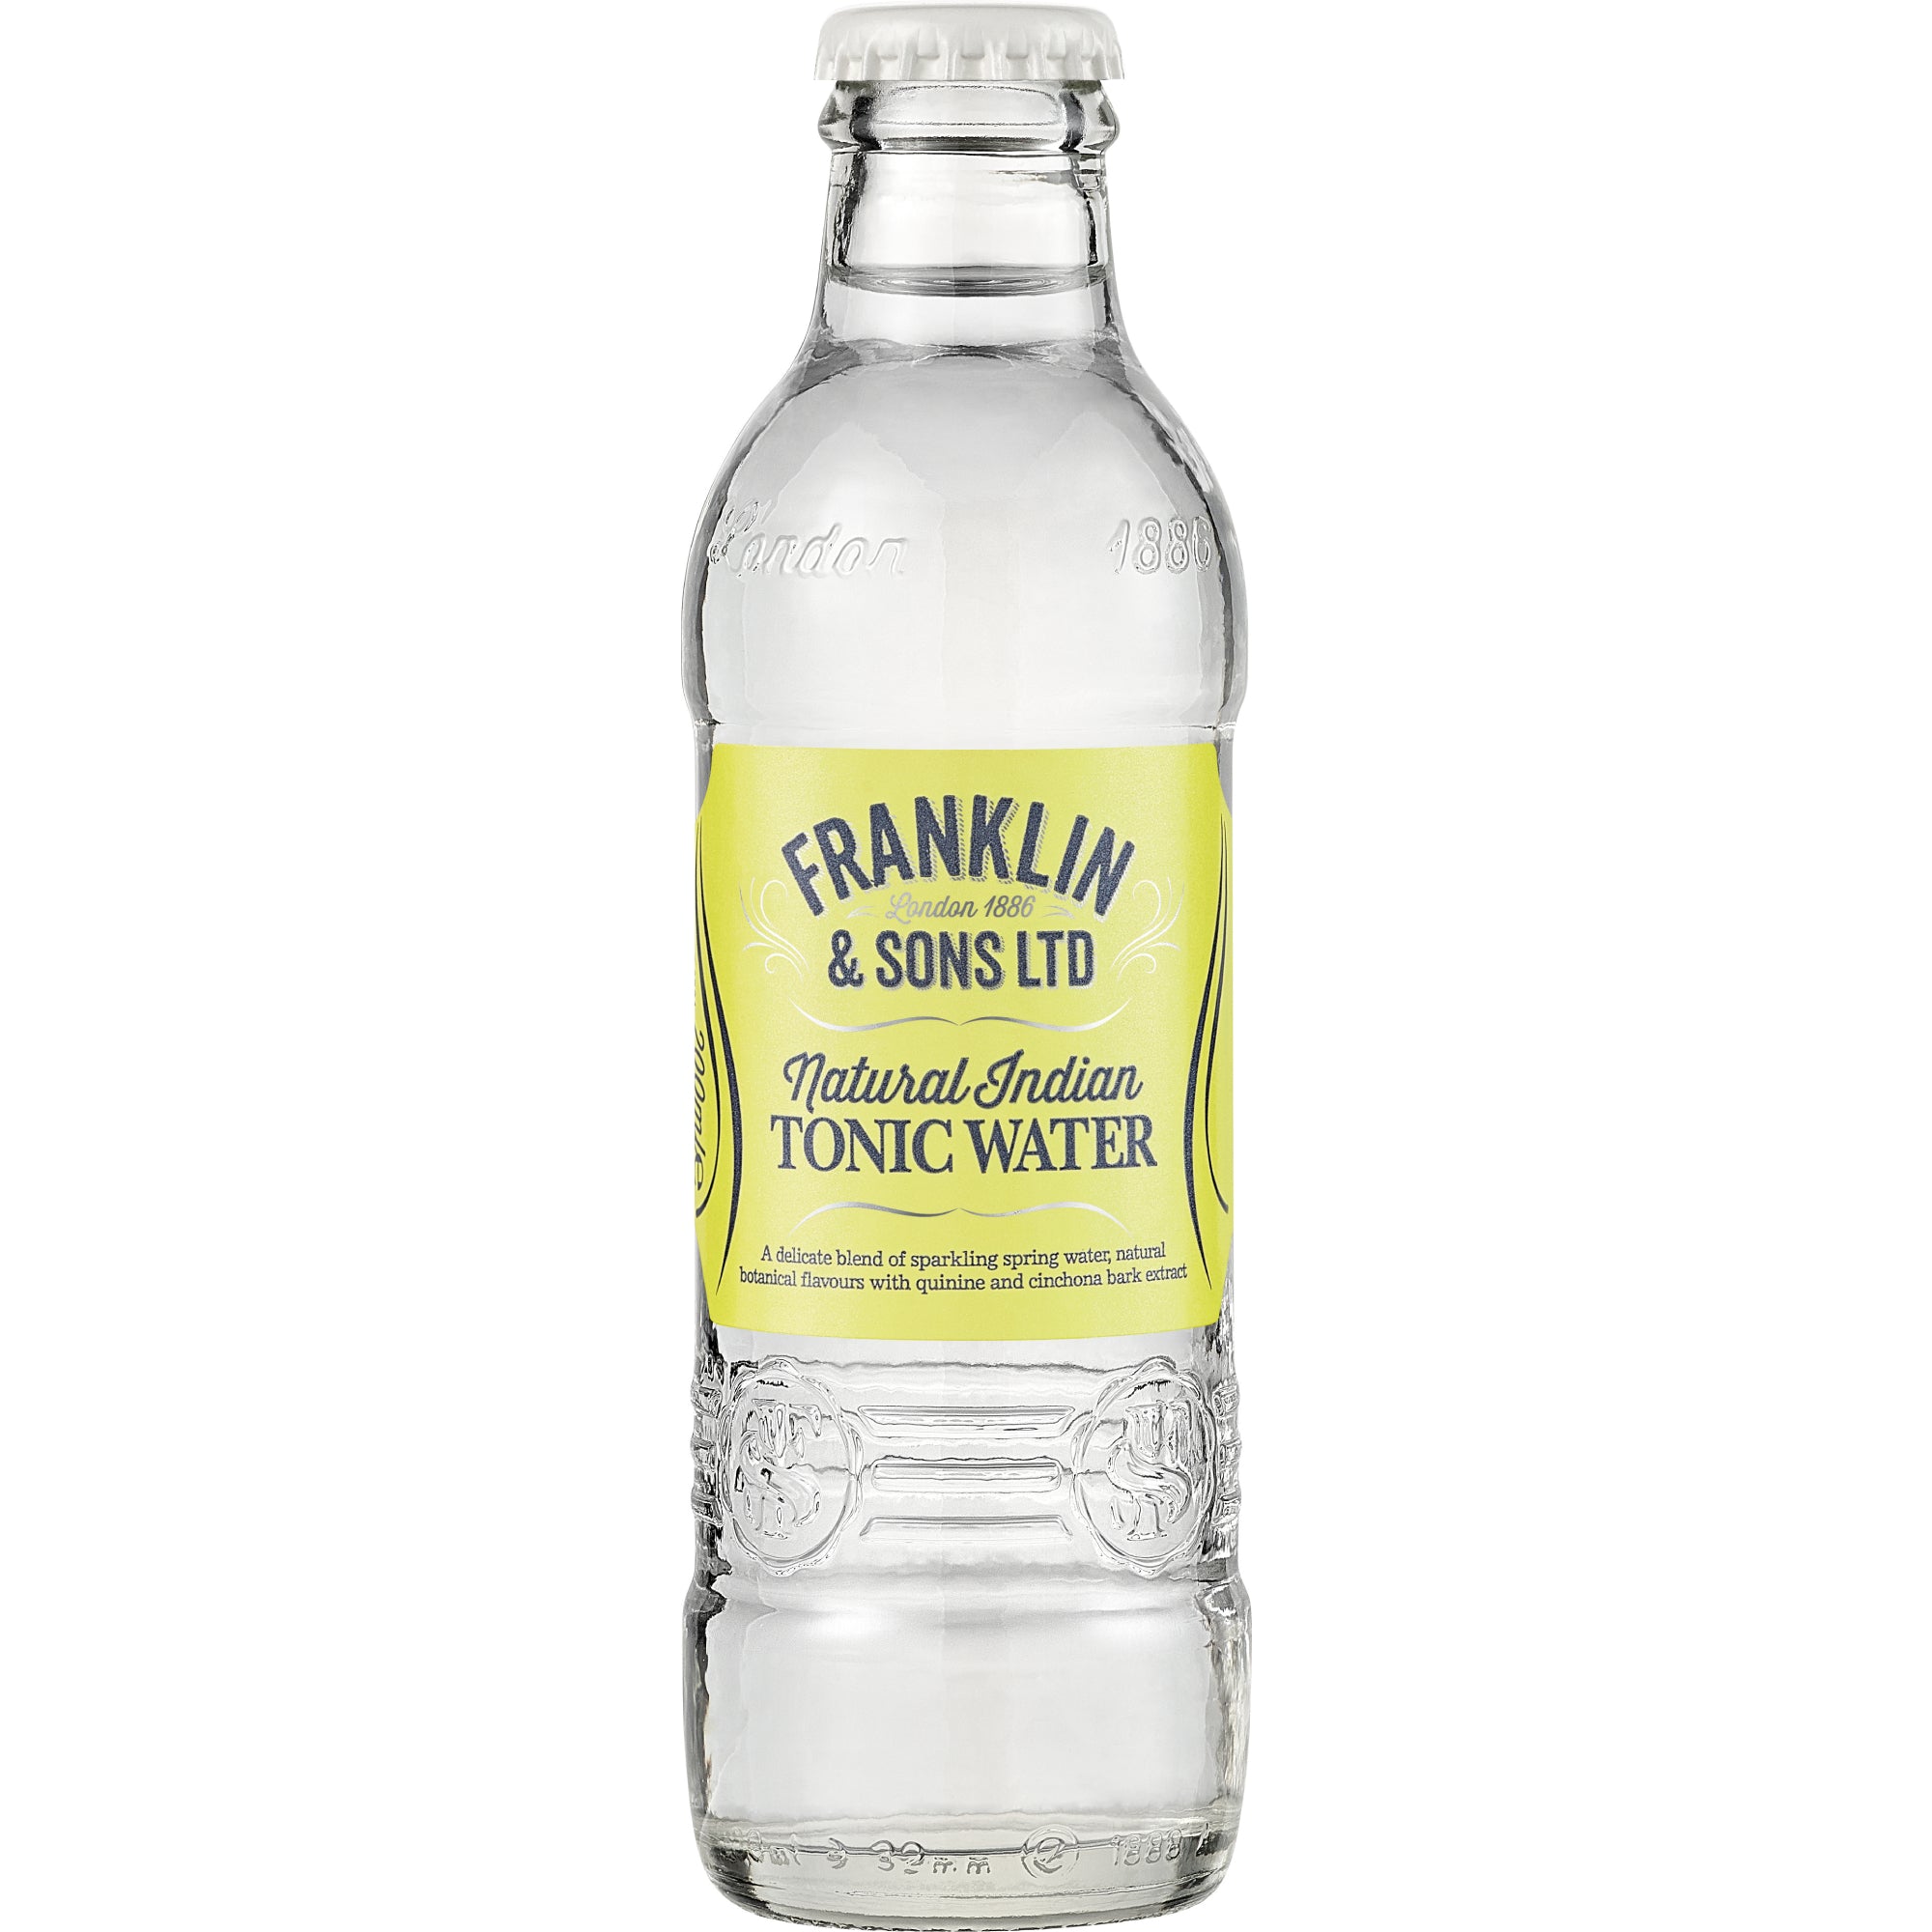 Franklin & Sons Tonic Water (Case of 24 x 200 mL) - Natural Indian Tonic Water